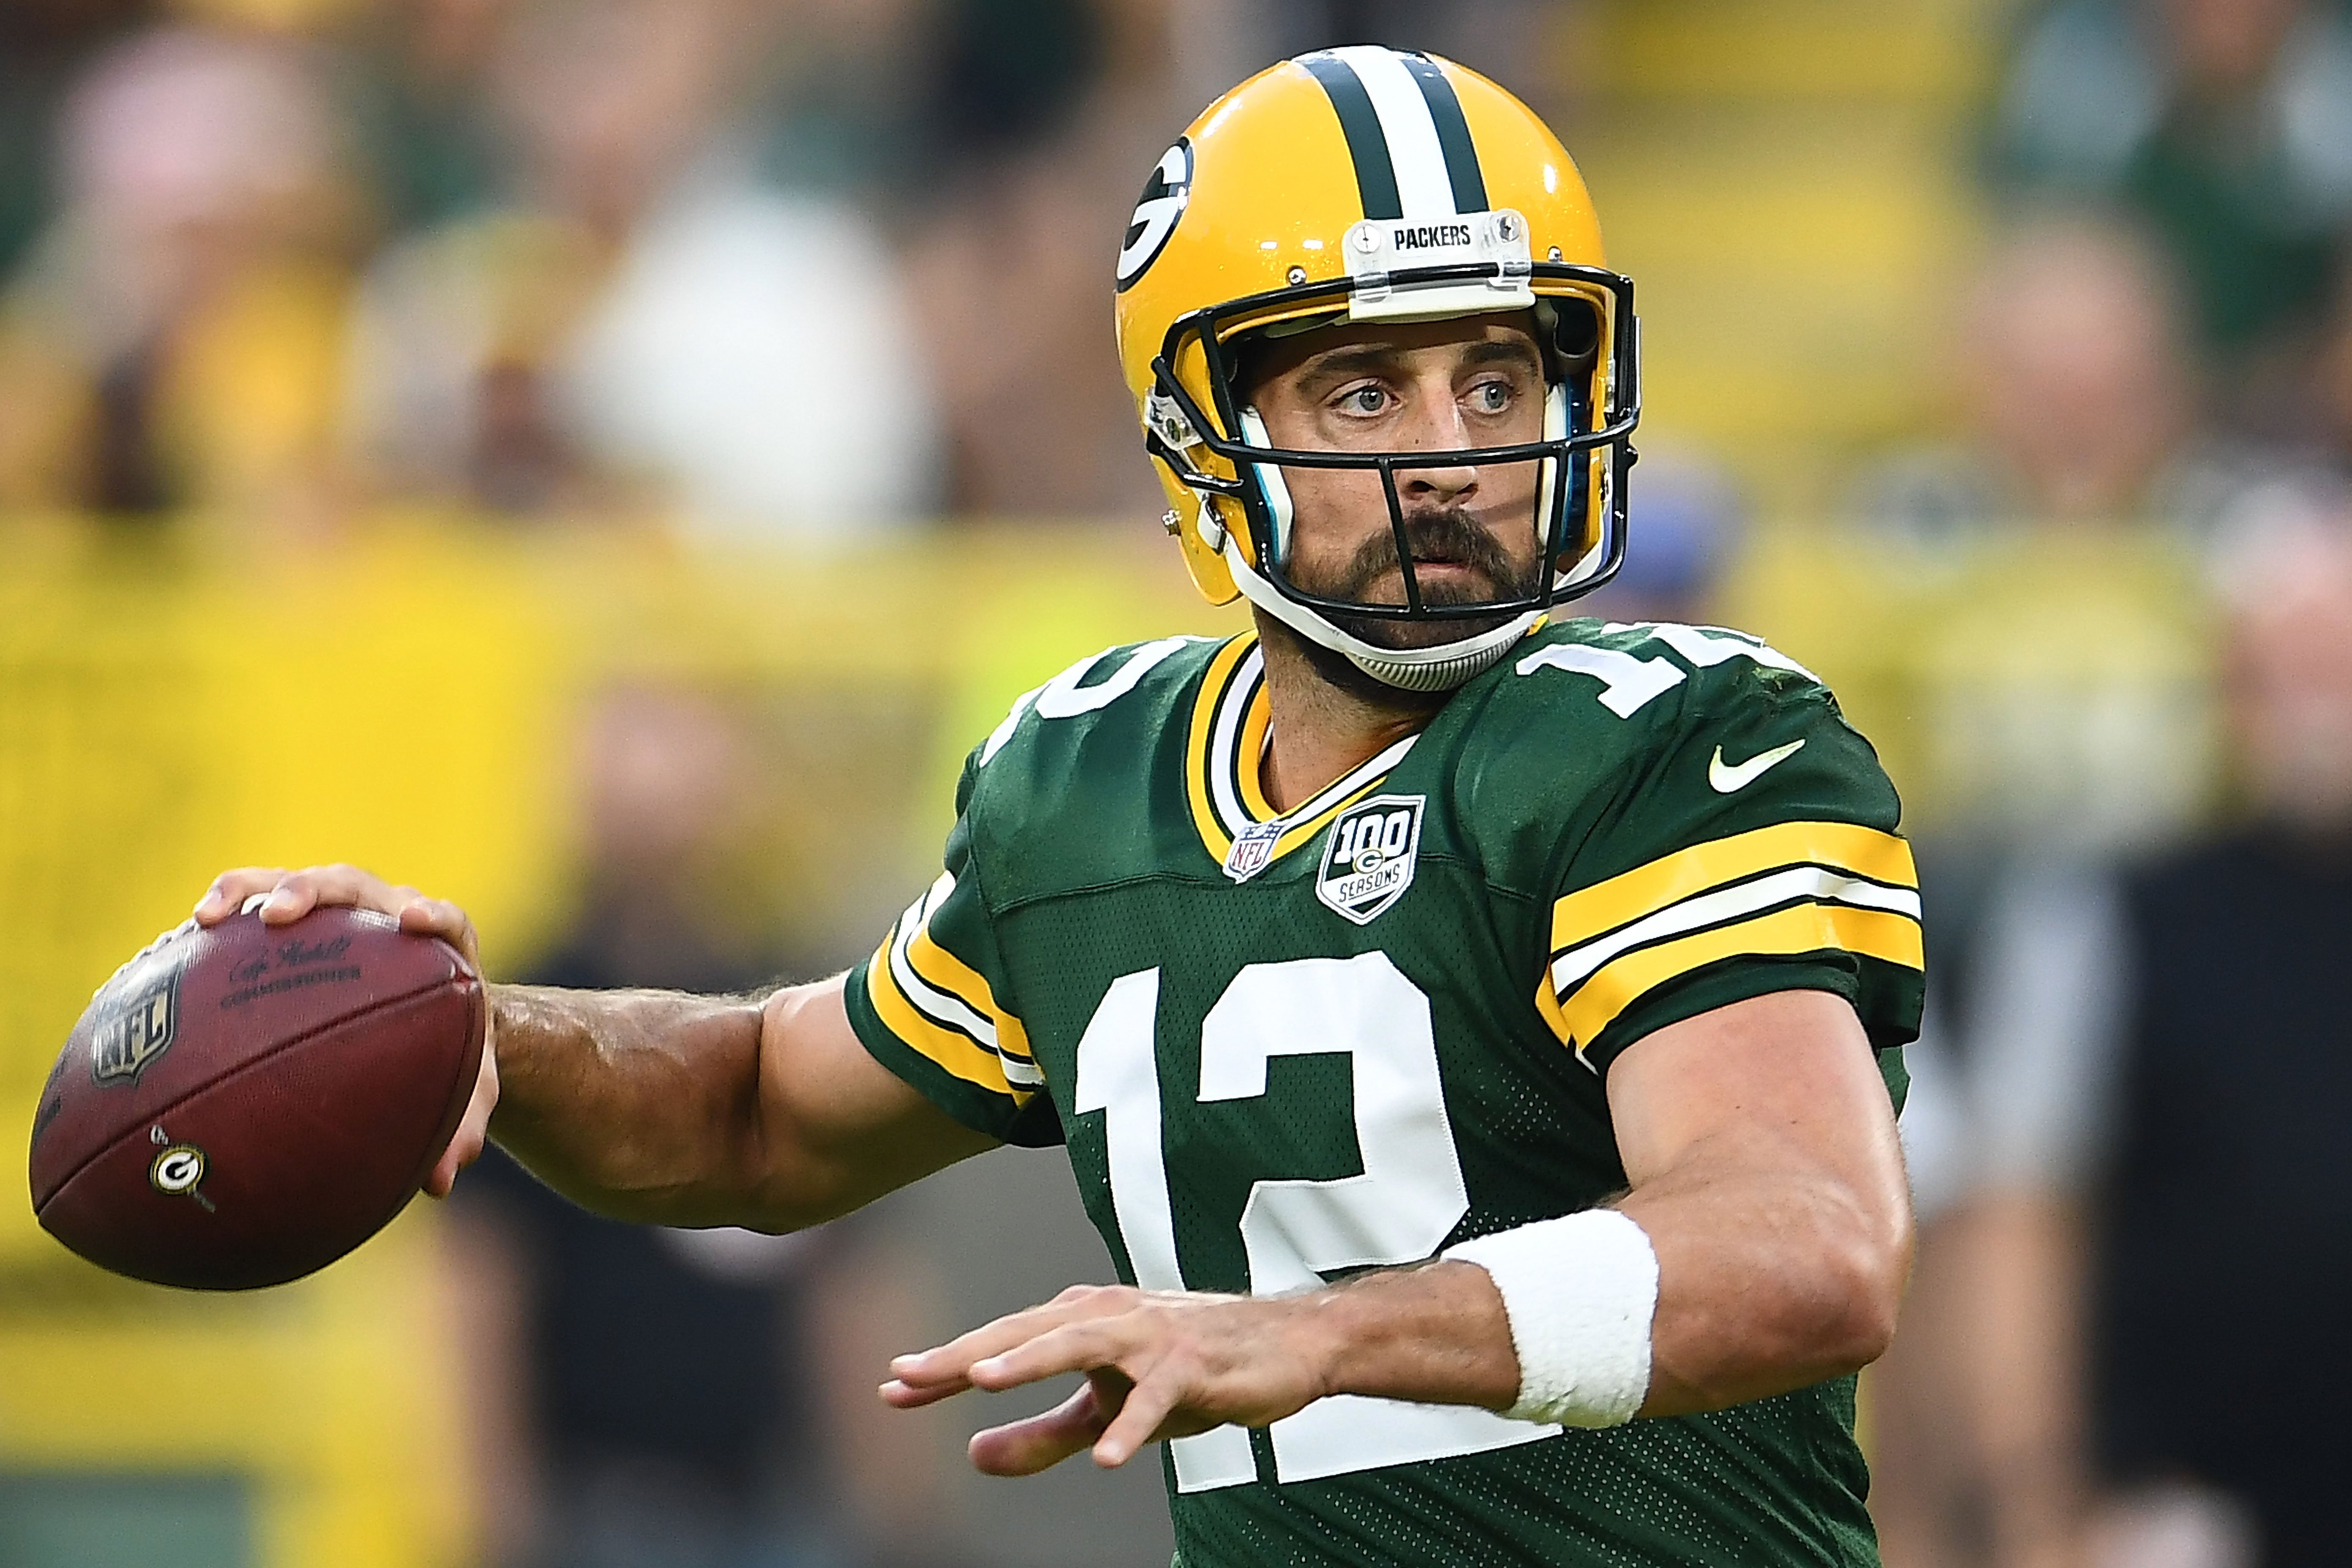 Aaron Rodgers #12 of the Green Bay Packers drops back to pass during a preseason game against the Pittsburgh Steelers at Lambeau Field on August 16, 2018 in Green Bay, Wisconsin | Photo: Getty Images